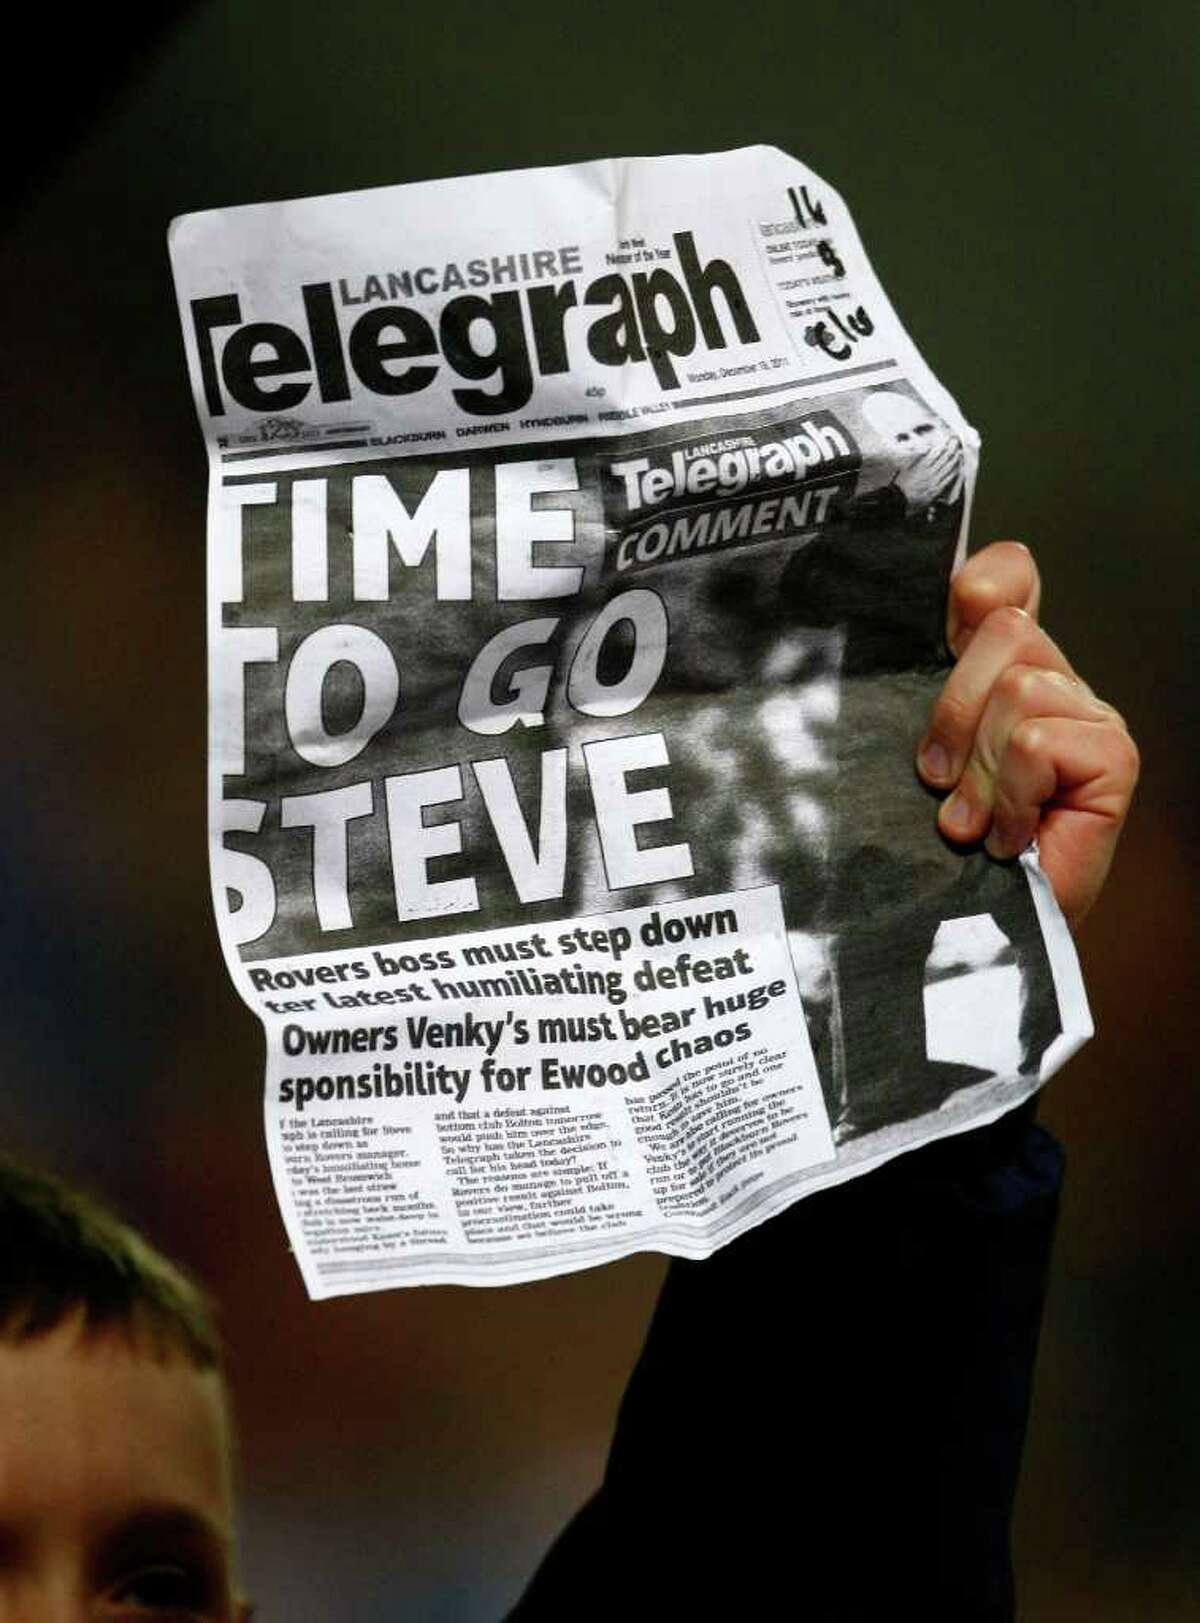 A Blackburn fan holds up a newspaper clipping during the English Premier League soccer match against Bolton at Ewood Park, Blackburn, England, Tuesday Dec. 20, 2011. (AP Photo/Tim Hales)